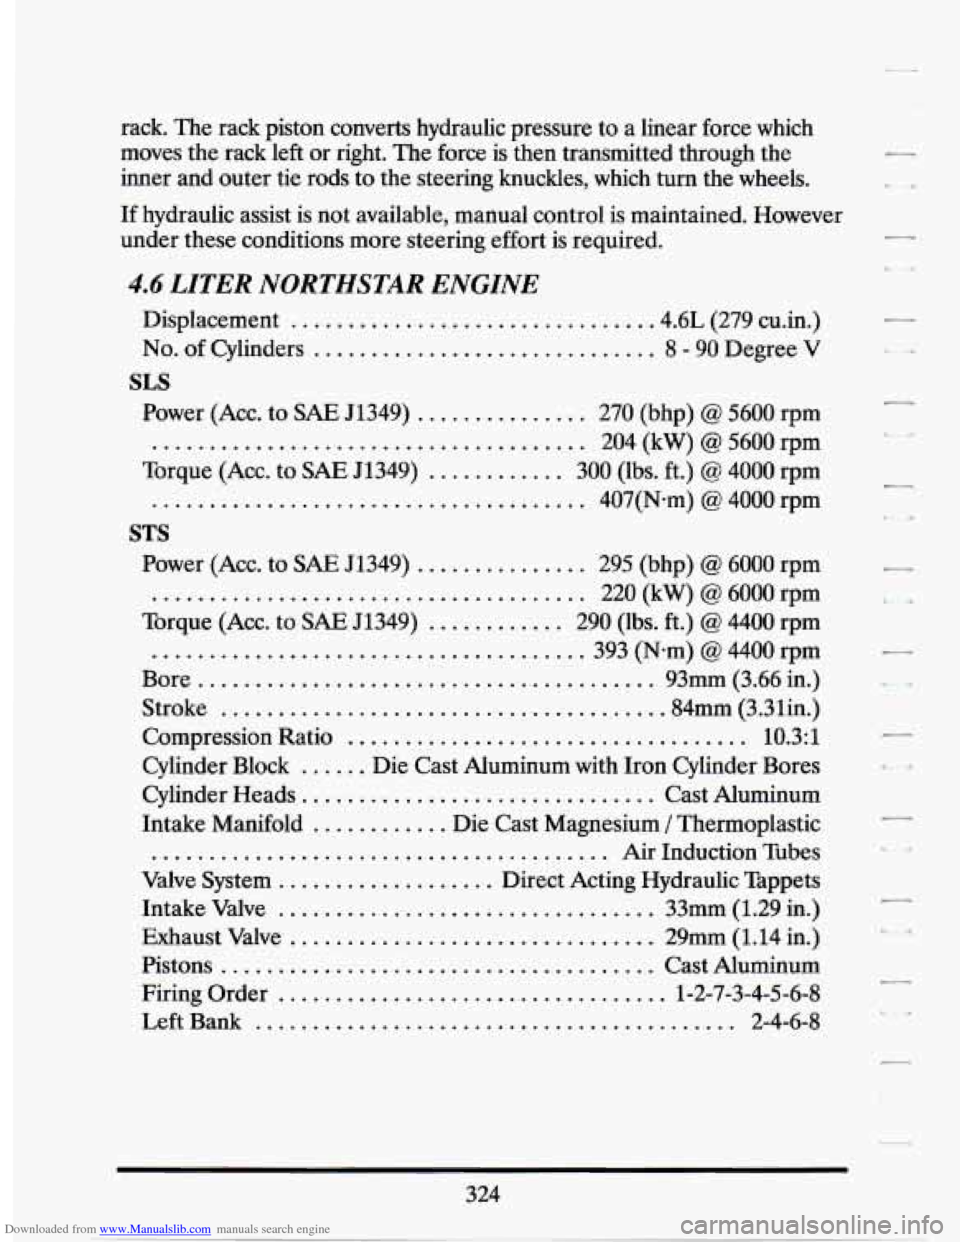 CADILLAC SEVILLE 1994 4.G Owners Manual Downloaded from www.Manualslib.com manuals search engine rack. The rack  piston  converts  hydraulic  pressure  to a  linear  force  which 
moves  the rack  left  or right.  The force  is then  transm